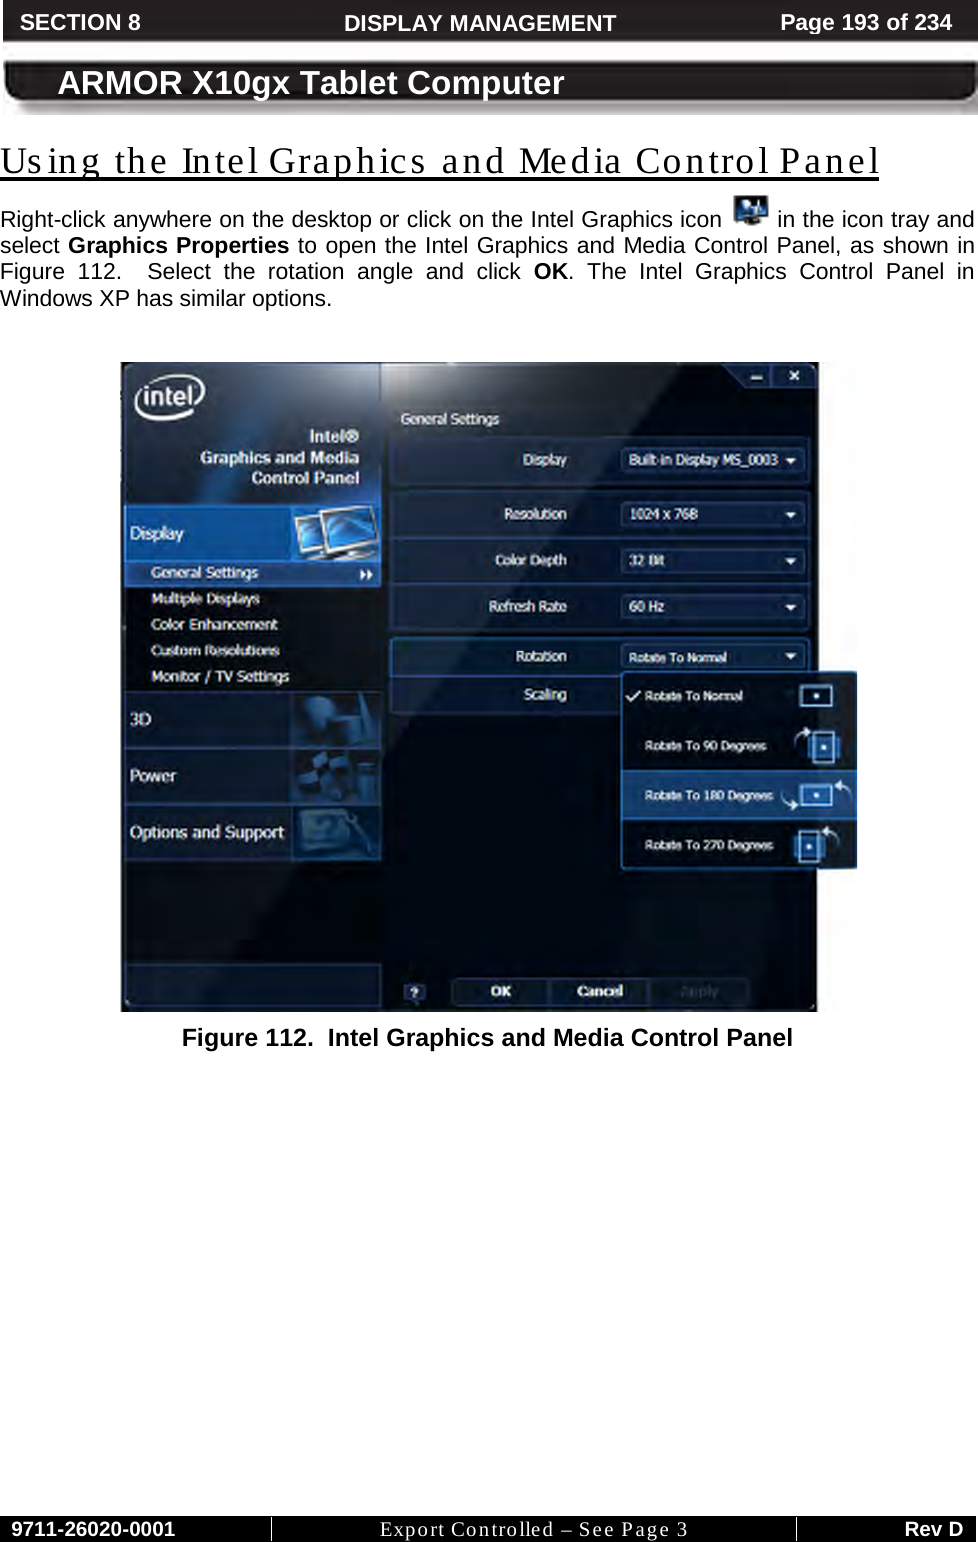     9711-26020-0001 Export Controlled – See Page 3 Rev D SECTION 8 DISPLAY MANAGEMENT Page 193 of 234  ARMOR X10gx Tablet Computer Us ing the Intel Graphics and Media Control Panel Right-click anywhere on the desktop or click on the Intel Graphics icon   in the icon tray and select Graphics Properties to open the Intel Graphics and Media Control Panel, as shown in Figure  112.  Select the rotation angle and click OK.  The Intel Graphics Control Panel in Windows XP has similar options.   Figure 112.  Intel Graphics and Media Control Panel    